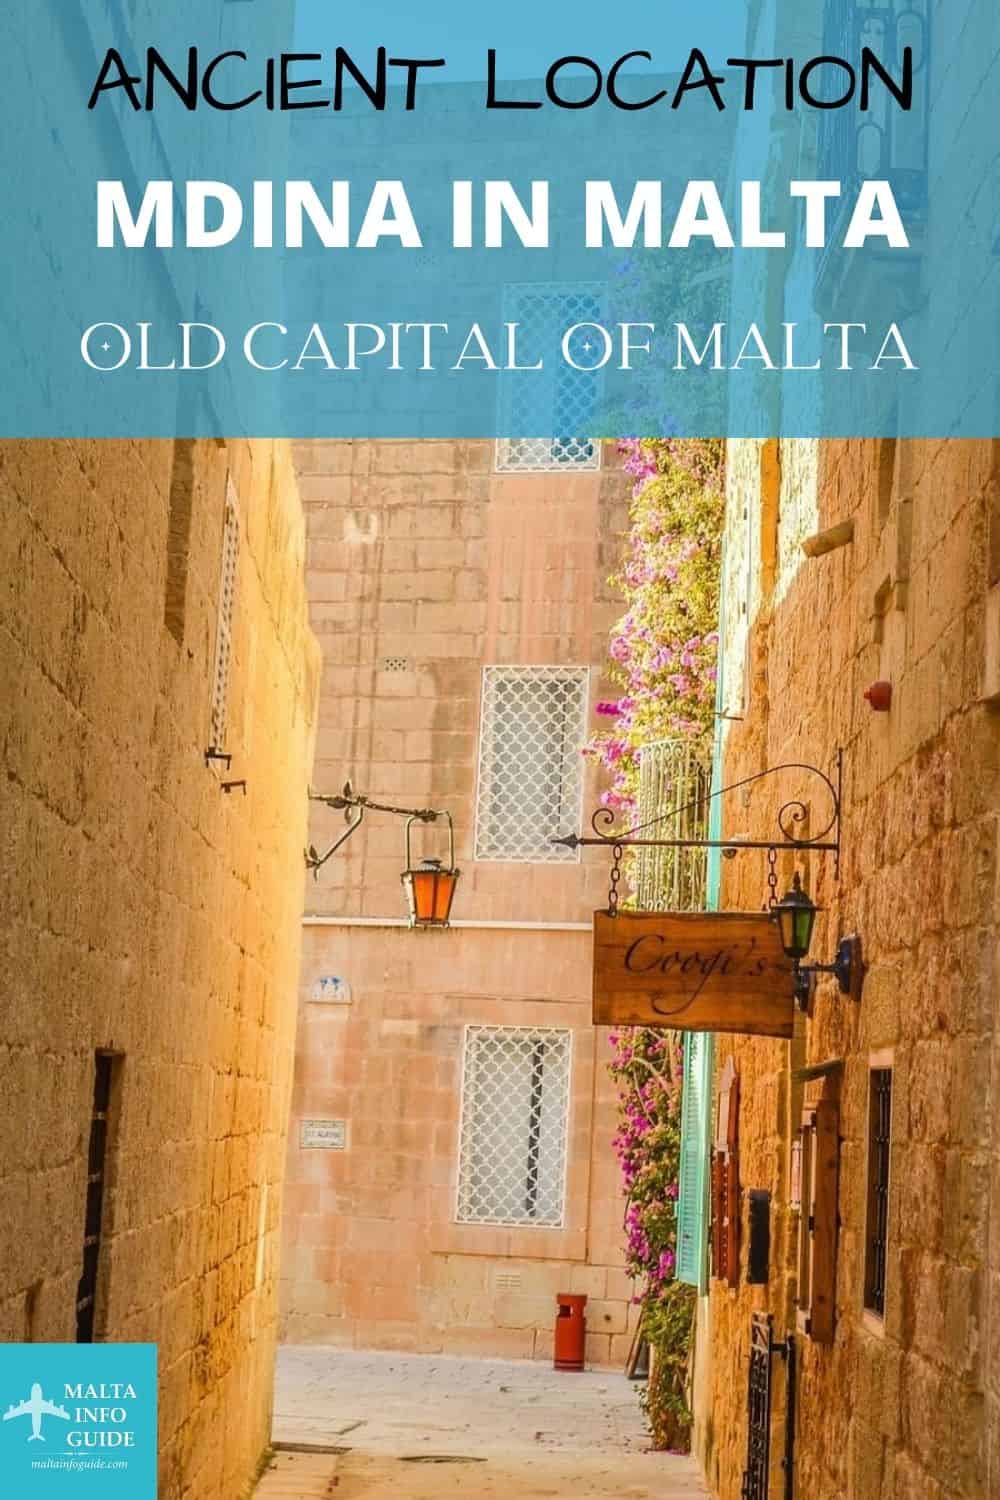 Here is the ultimate guide to the city of Mdina in Malta. Use this guide to help visit most of the city.